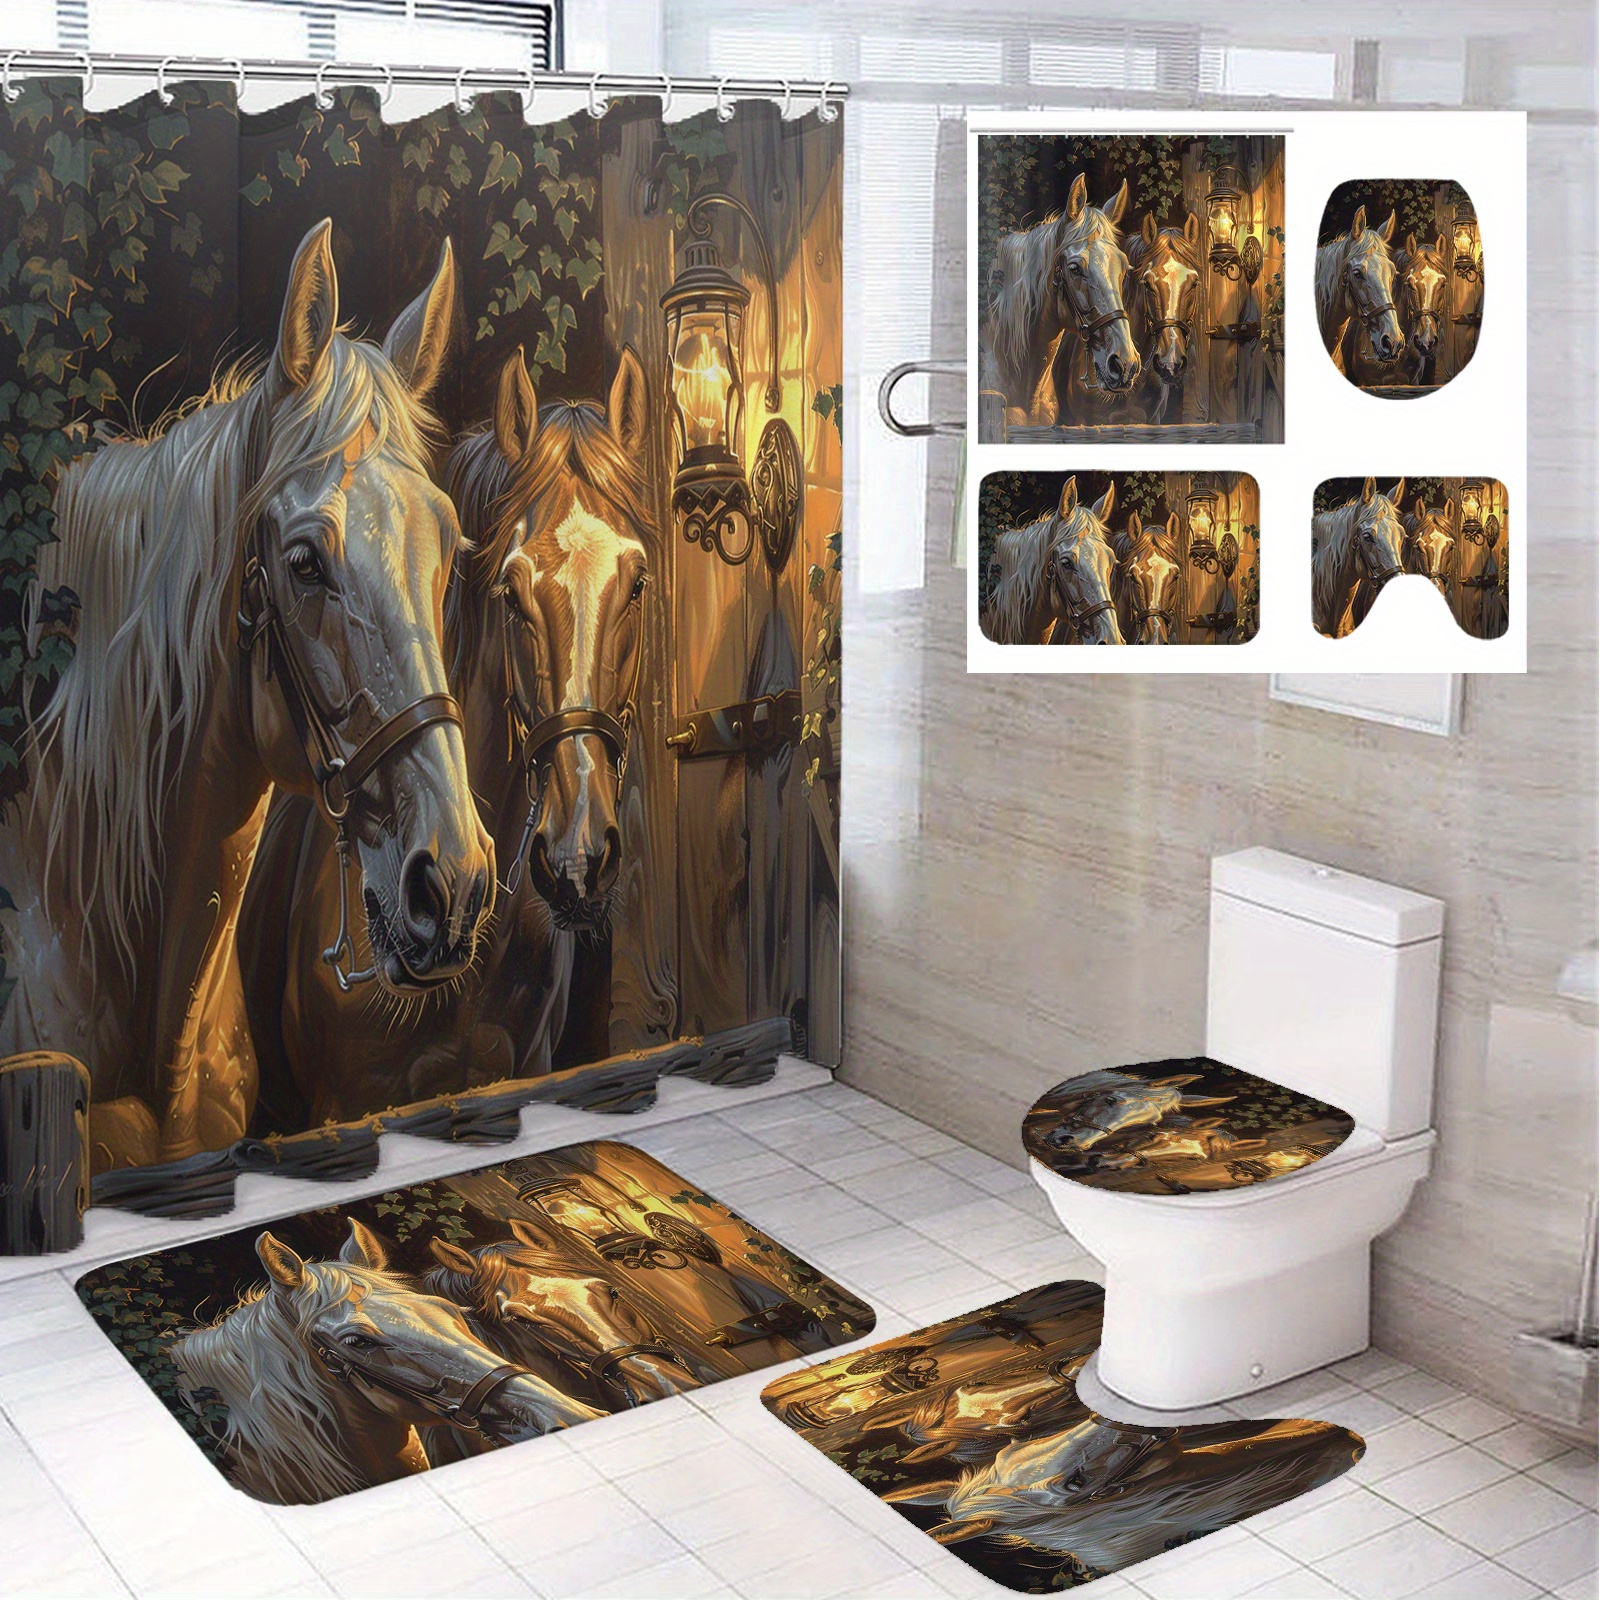 

1/4pcs 2 Horses Pattern Modern Bathroom Decoration, Polyester Bathroom Set With 12 Hooks, Bathroom Non-slip Mat, Toilet Seat Cover And U-shaped Mat Home Decoration 71*71in